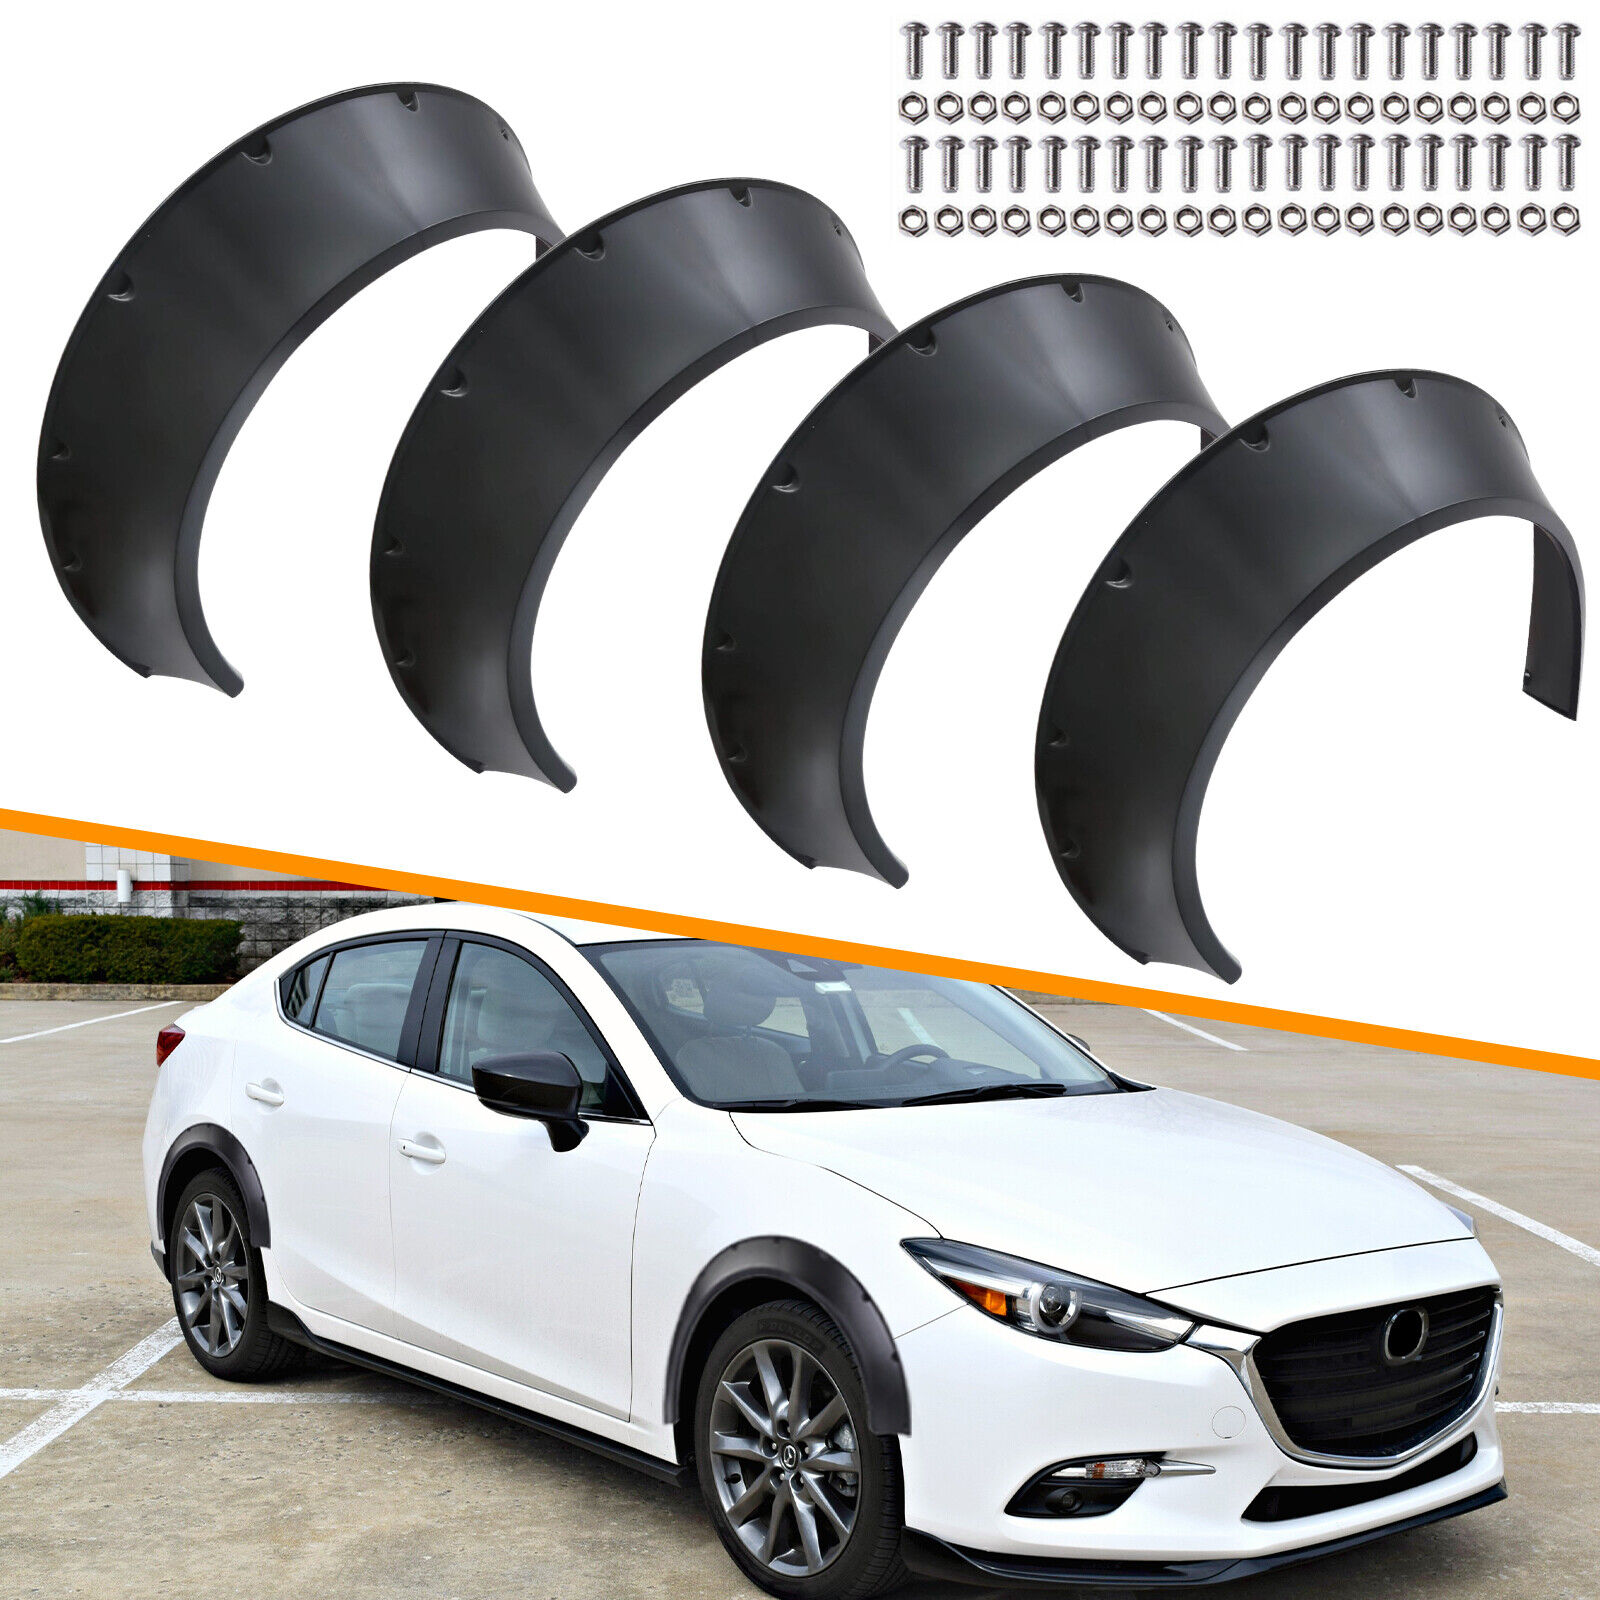 4 Car Fender Flares Wheel Arches Extra Wide Body Kit Fits for Mazda 2,3,6 MX-3,5